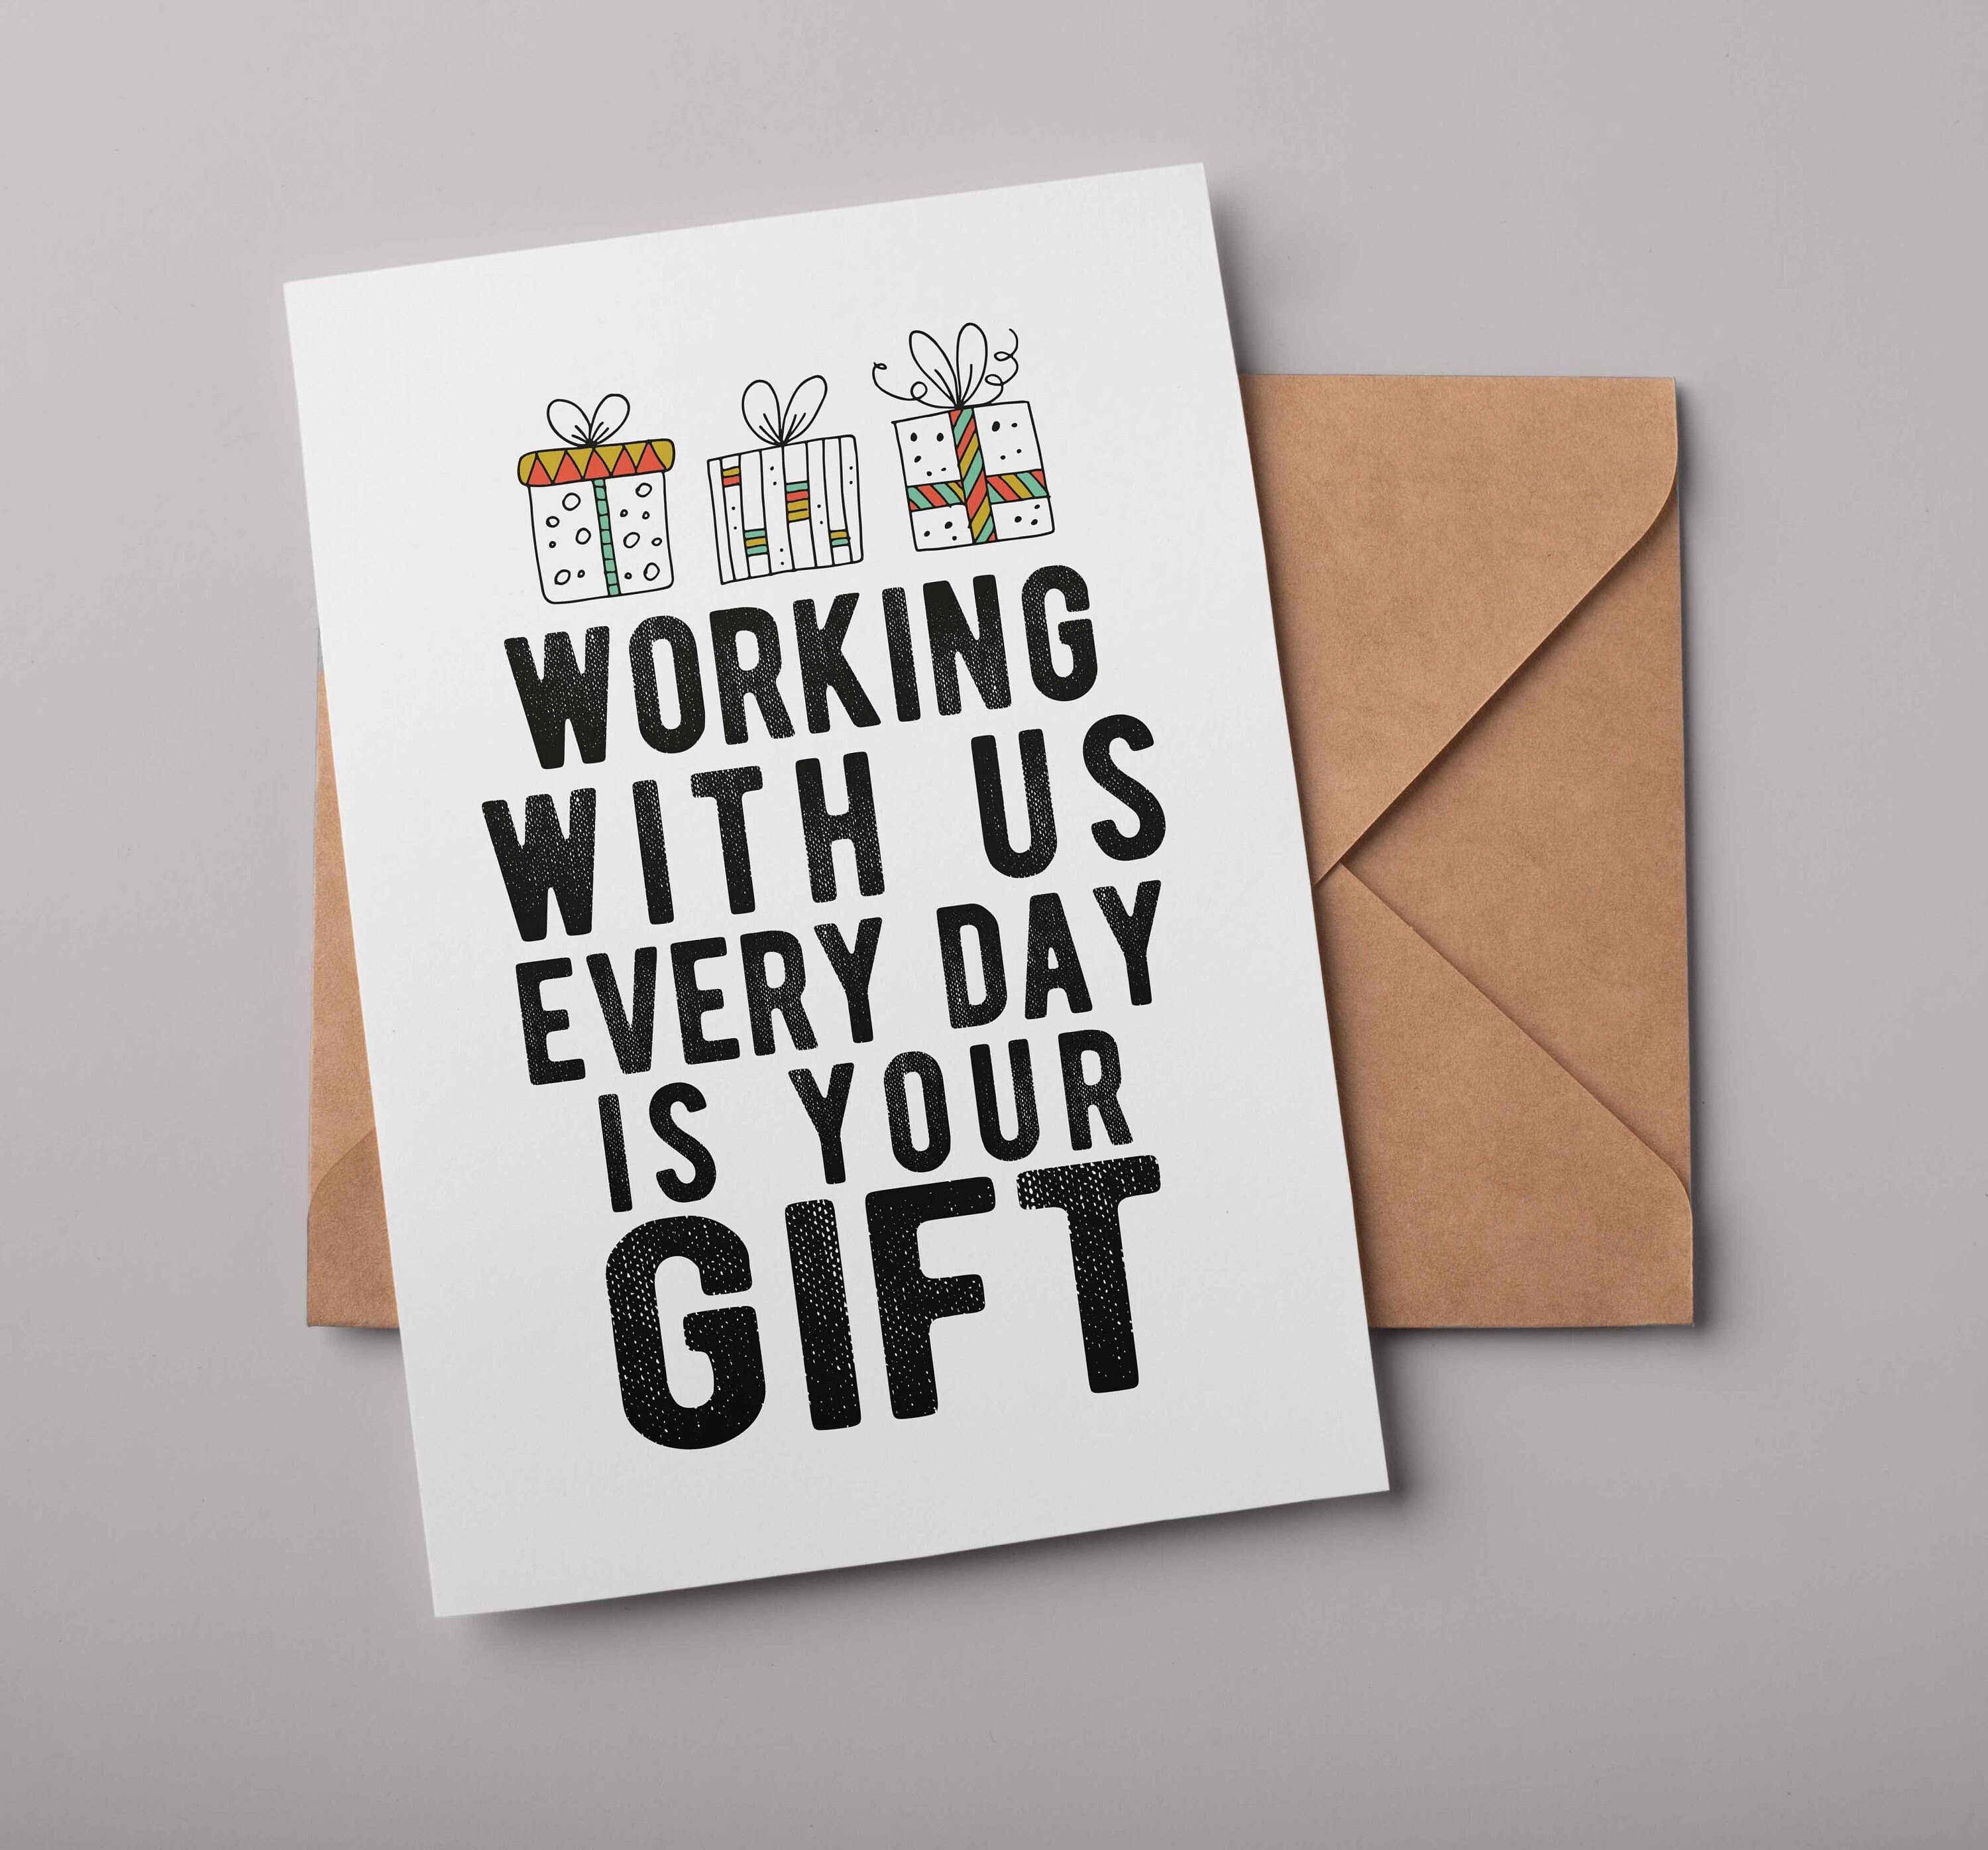 Emotional Support CoWorker Card, CoWorker Birthday Card, Funny CoWorker  Thank You Day Card, Job Thank You Card, EMOTIONAL SUPPORT COWORKER